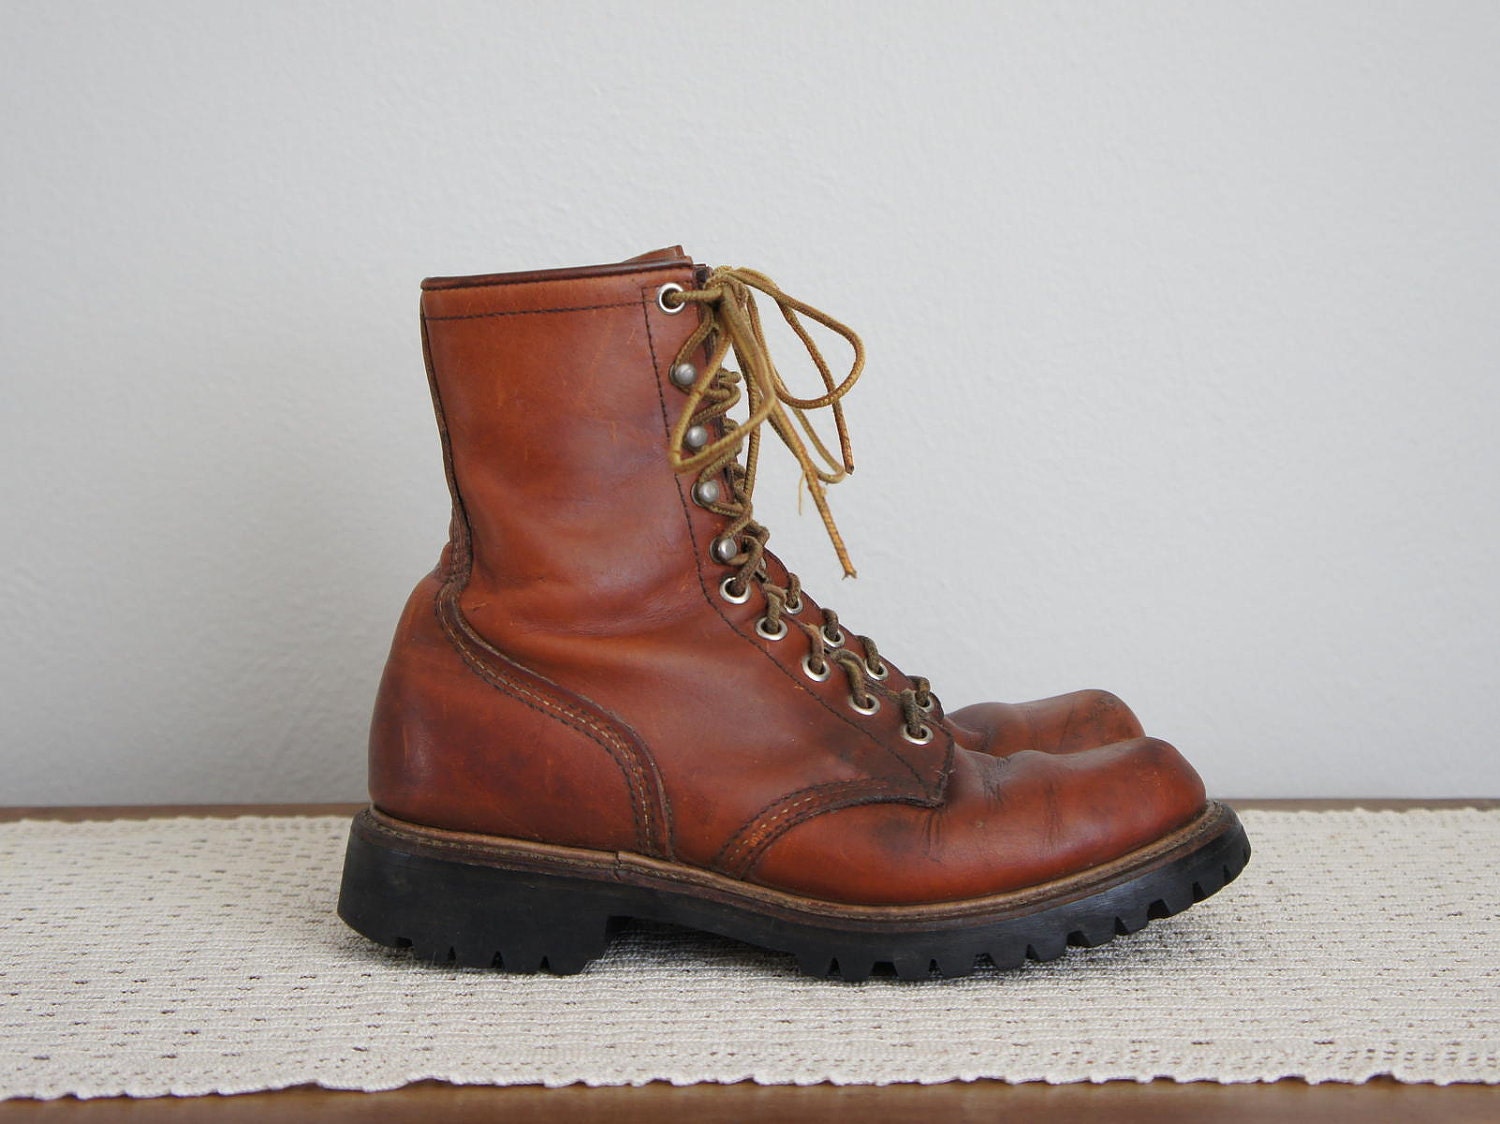 vintage 1960s Red Wing work boots . Irish Setter by FigMintVintage